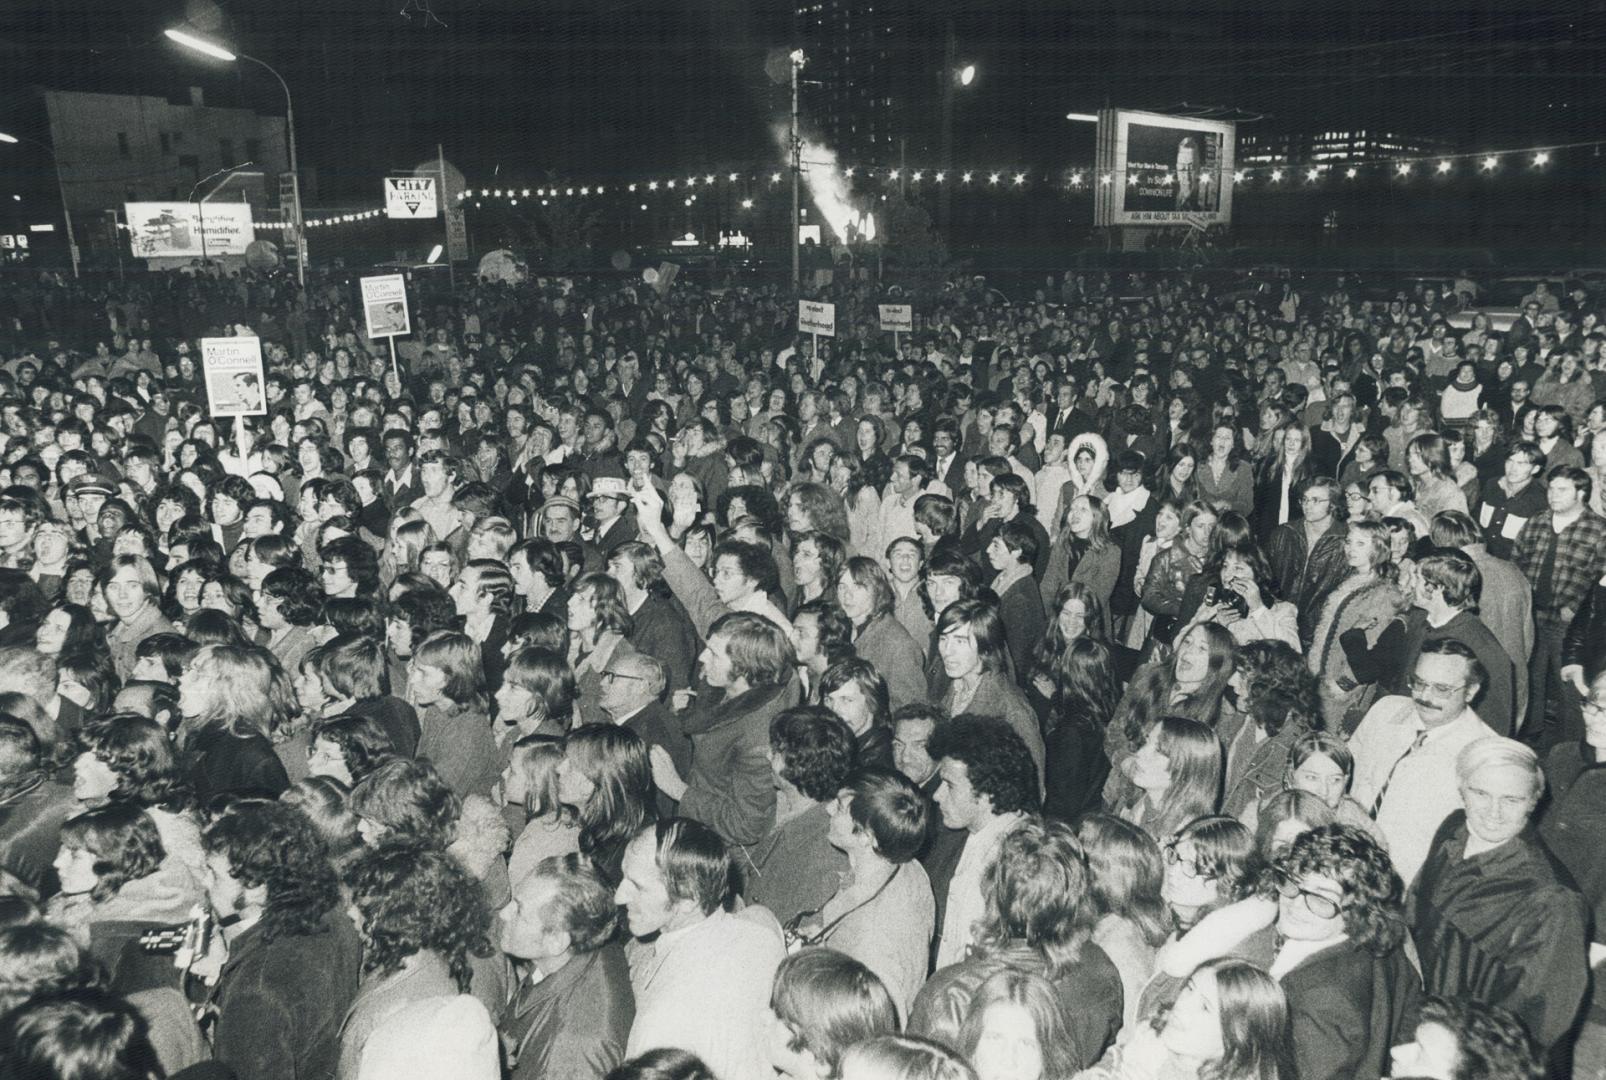 With the 17,000 seats in Maple Leaf Gardens filled, an overflow crowd of about 4,000 mills outside last night, Prime Minister Pierre Trudeau later spoke from a truck